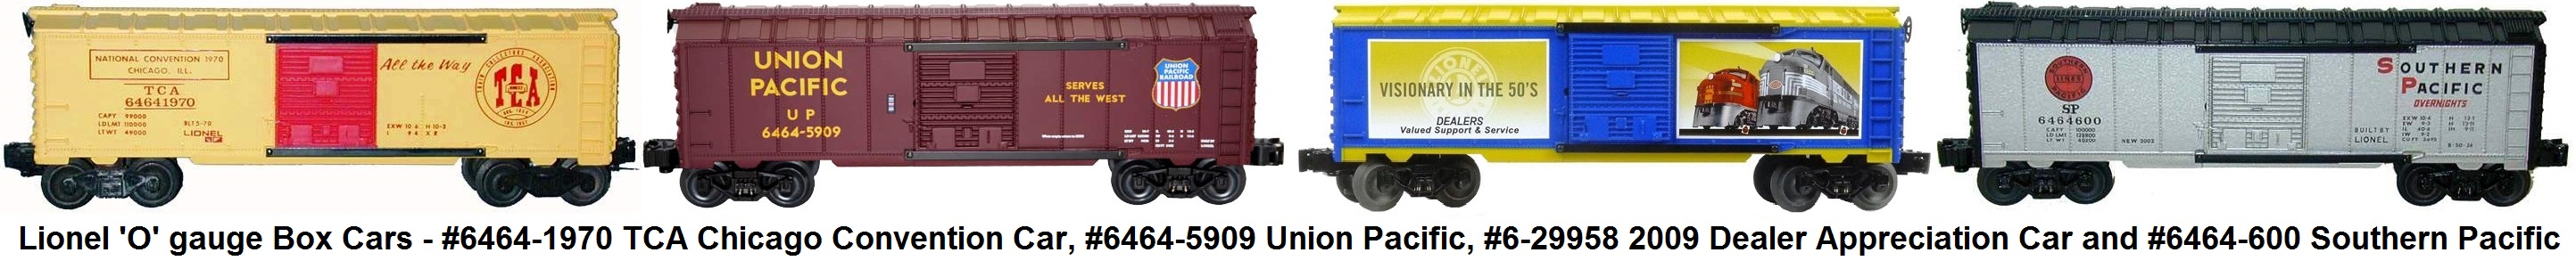 Lionel 'O' gauge #6464-1970 TCA Chicago Convention Car, #6464-5909 Union Pacific, #6-29958 2009 Dealer Appreciation Car and #6464-600 Southern Pacific Box Cars